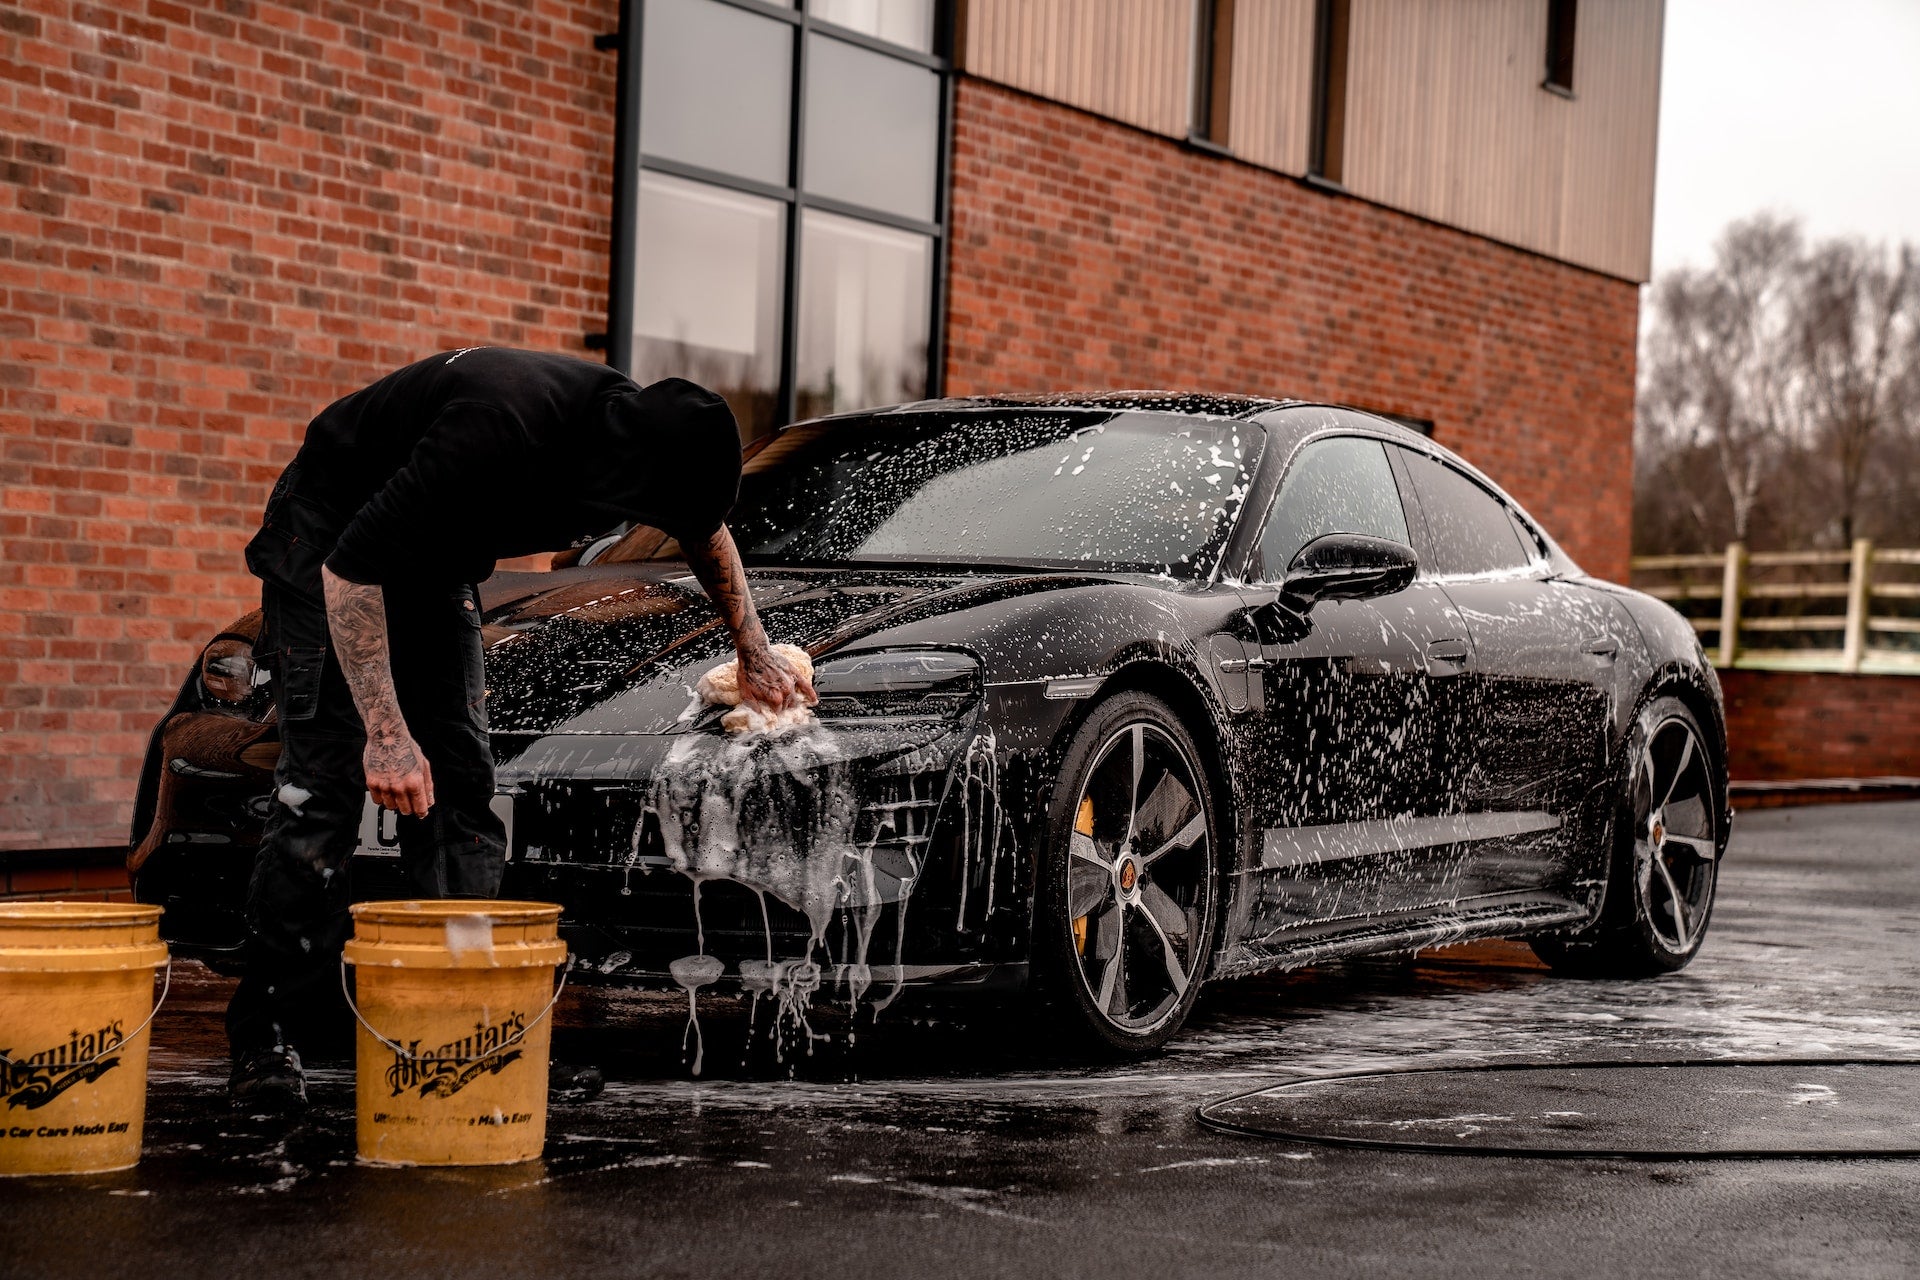 Two Bucket car wash method - Car Cleaning - Fairspot